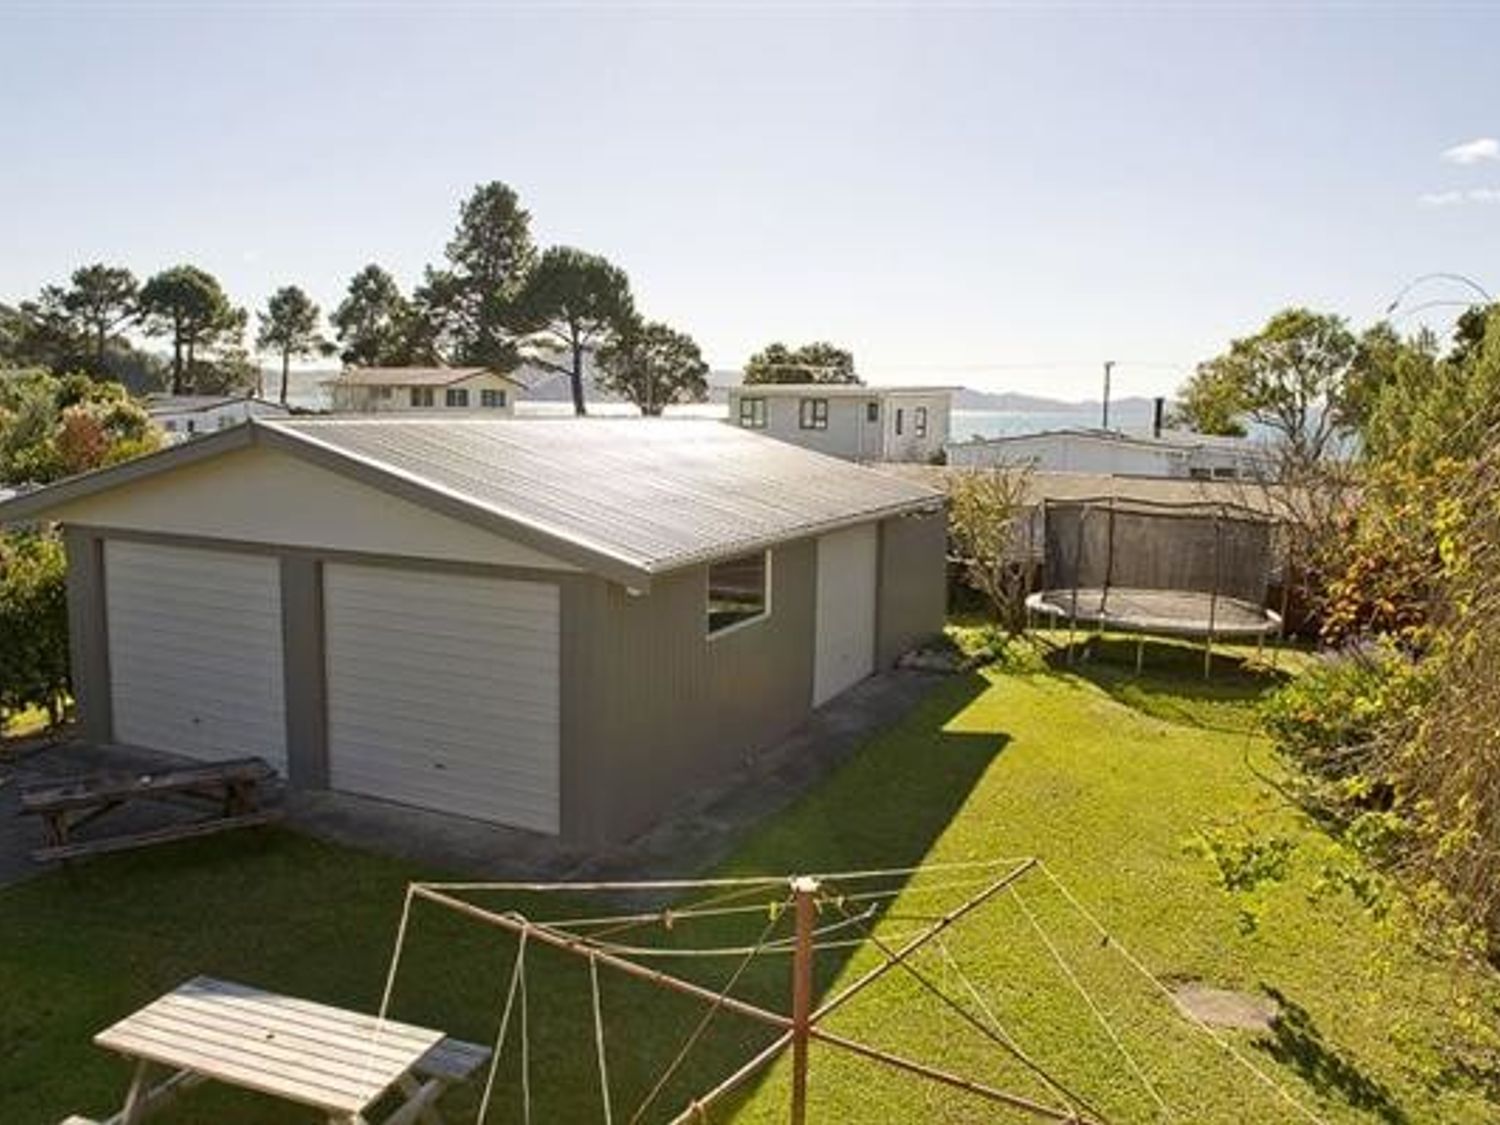 Joes Place - Cooks Beach Holiday Home -  - 1028419 - photo 1